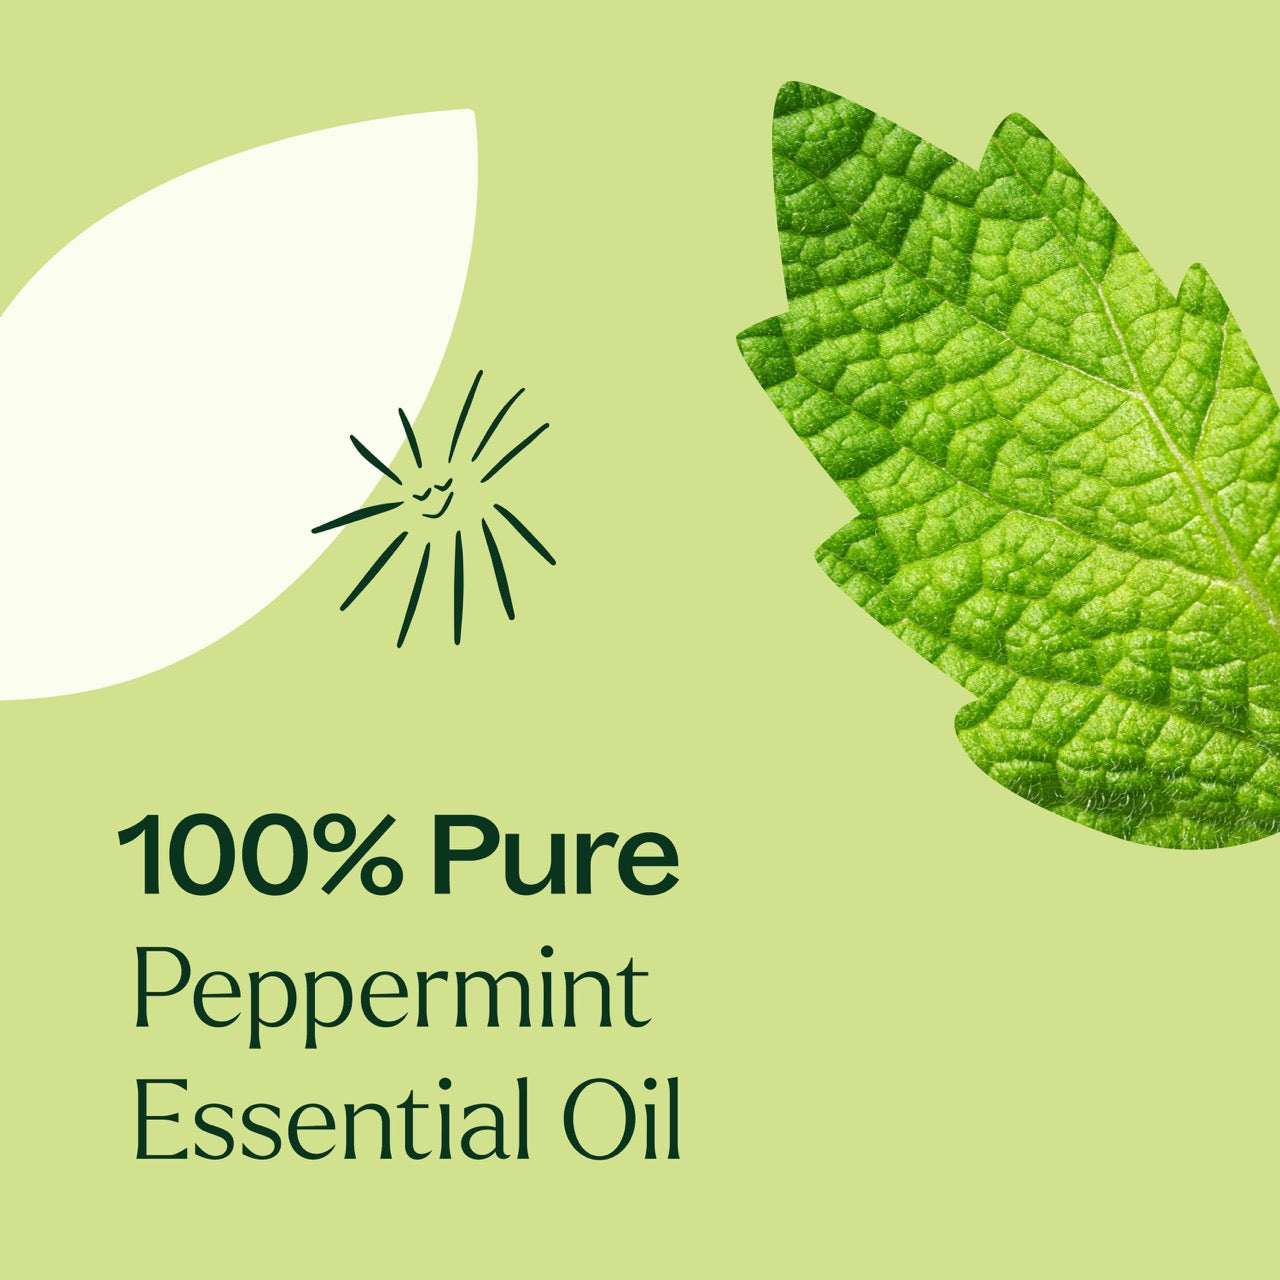 100% pure Peppermint Essential Oil